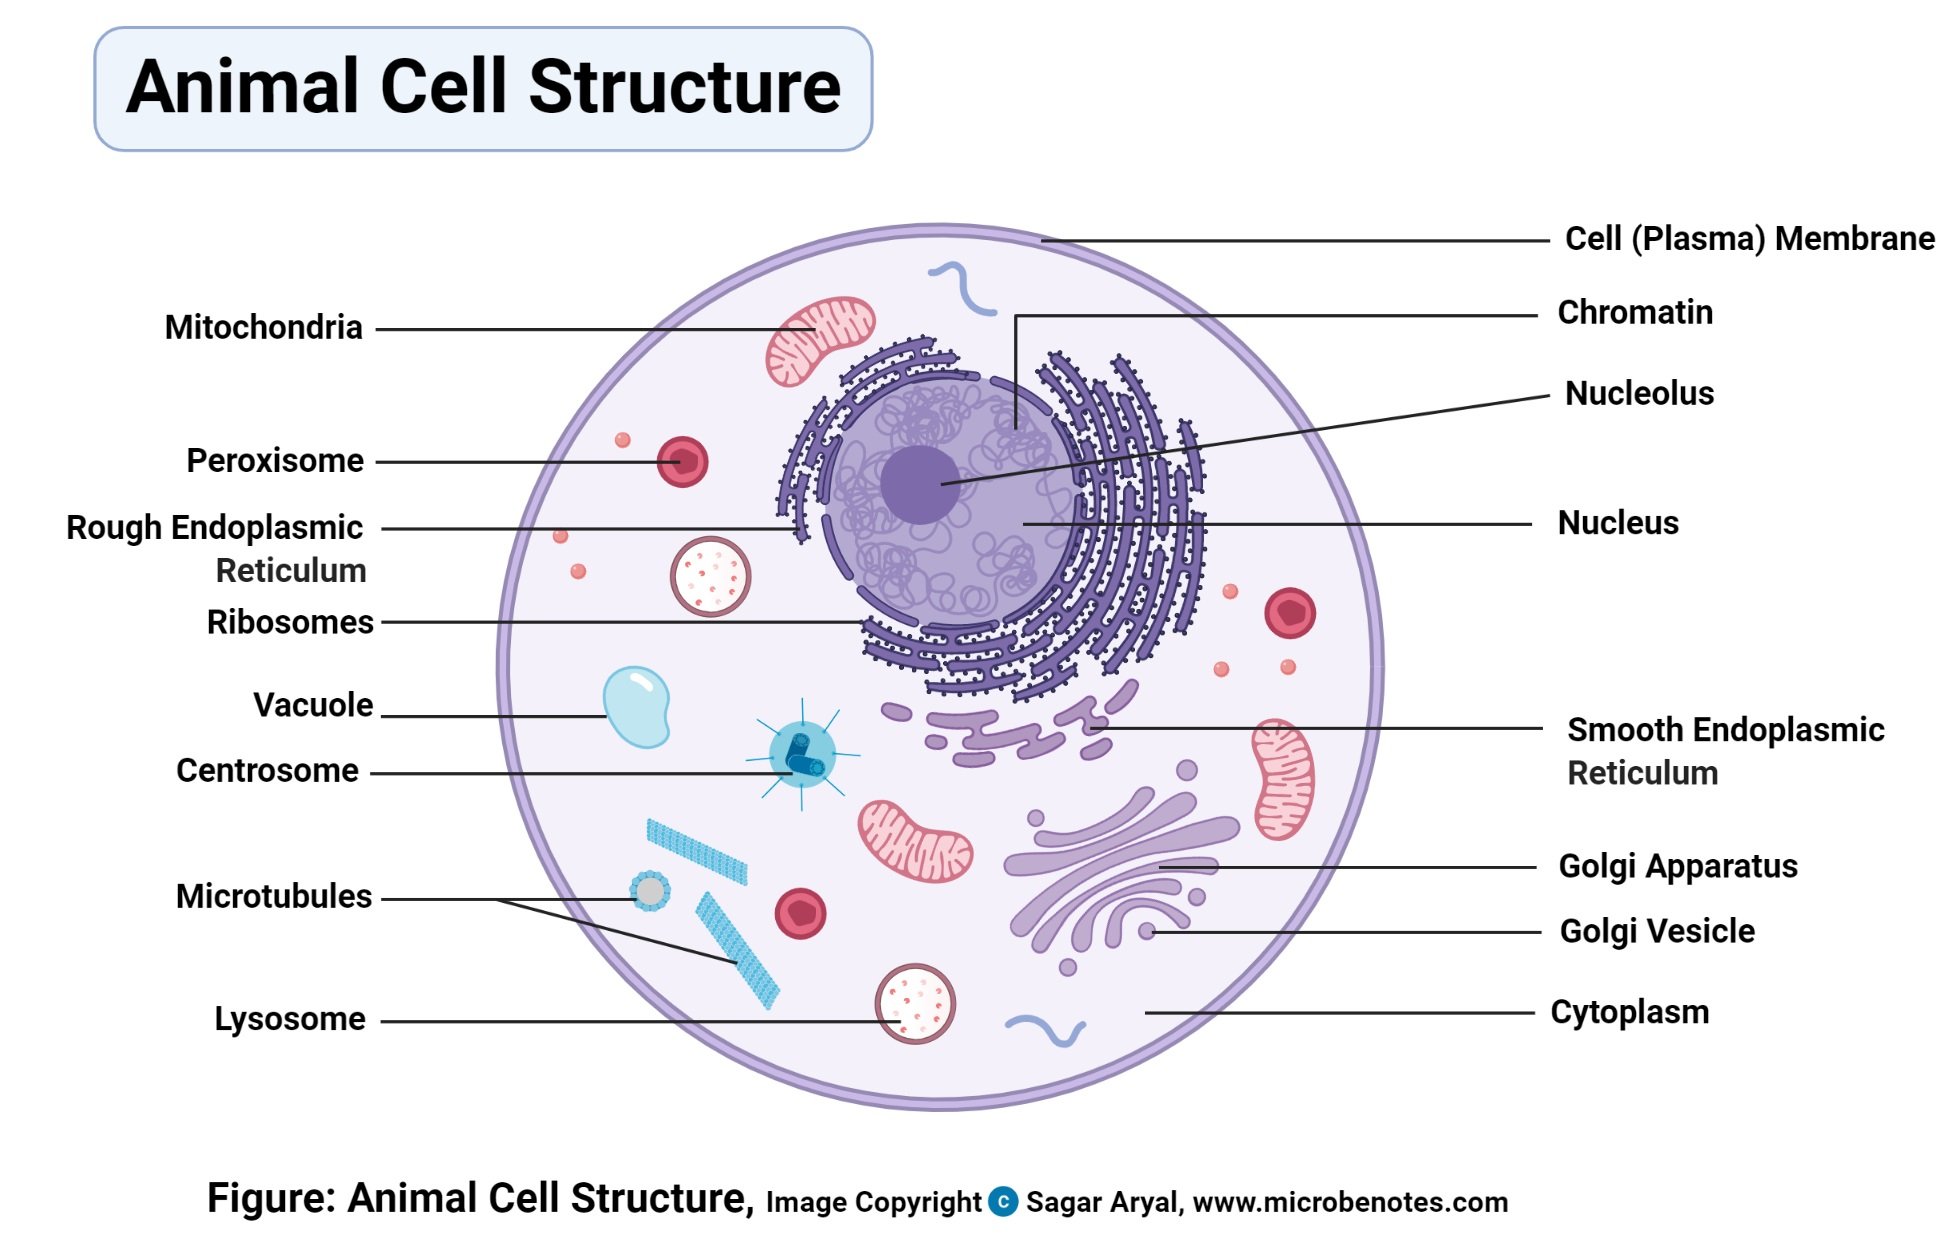 Animal Cell- Definition, Structure, Parts, Functions, Labeled Diagram